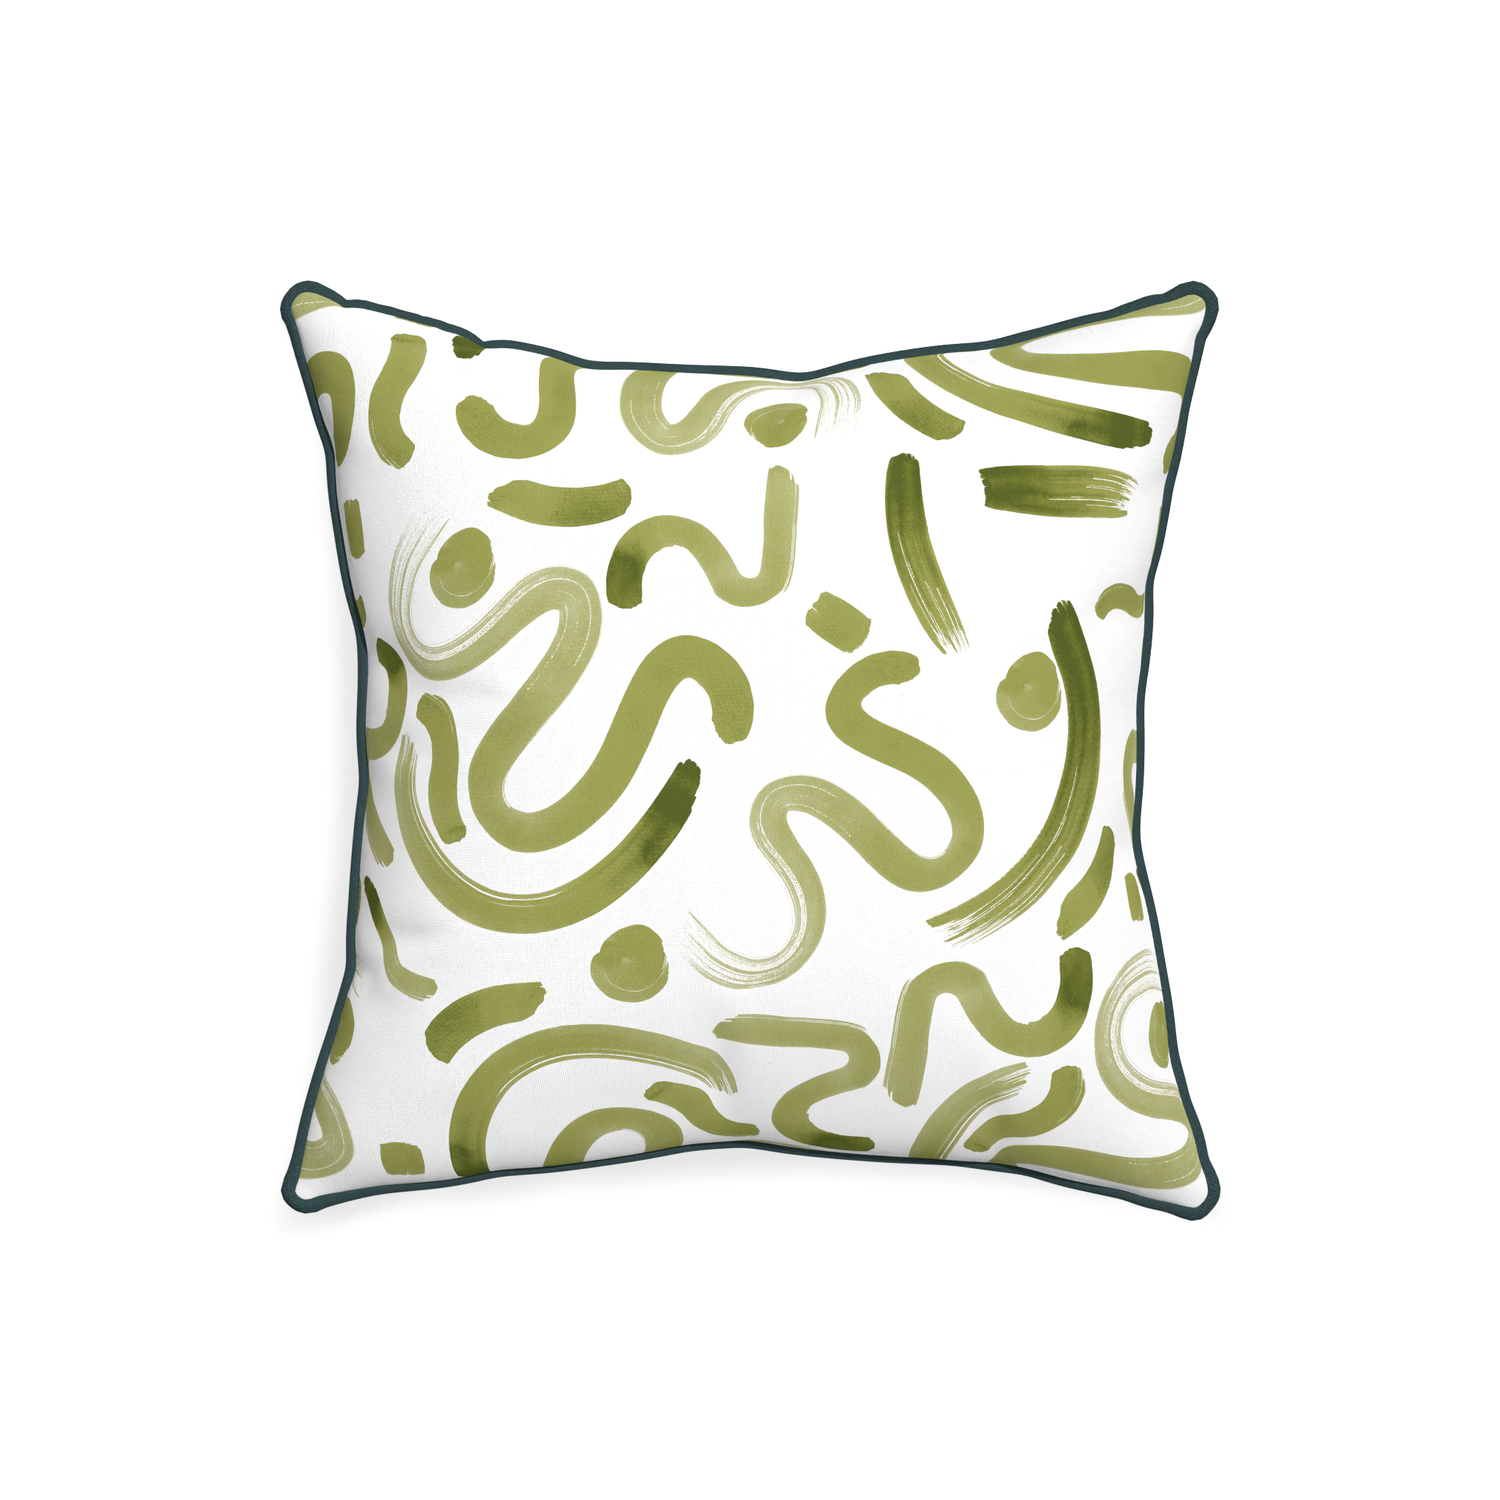 20-square hockney moss custom moss greenpillow with p piping on white background